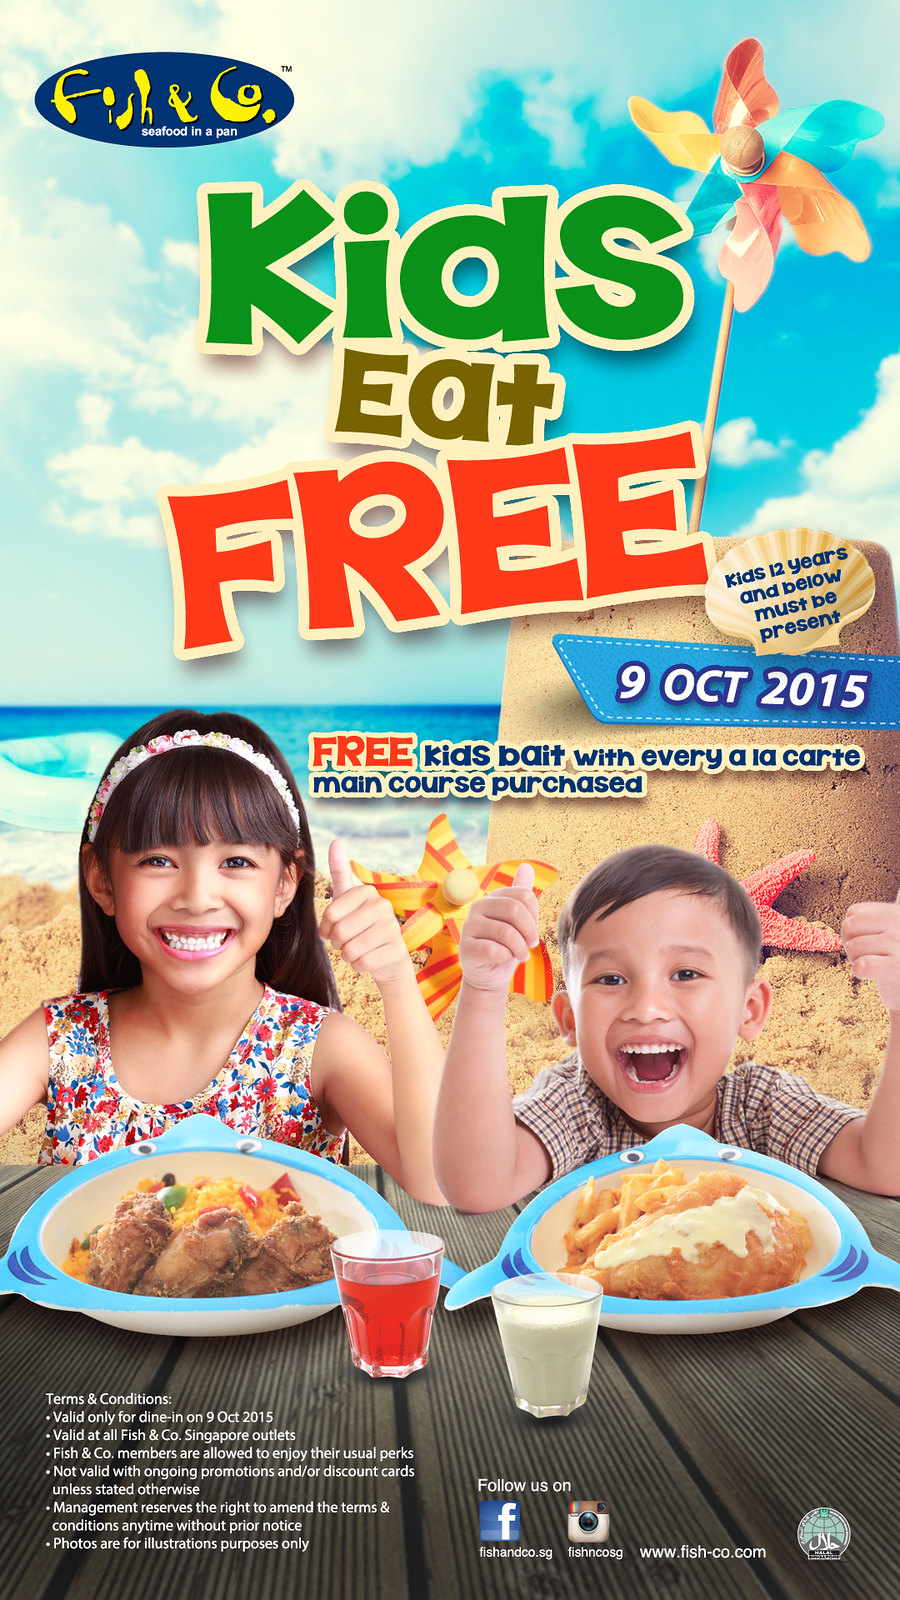 Kids eat for FREE at Fish & Co for Children's Day! - Alvinology